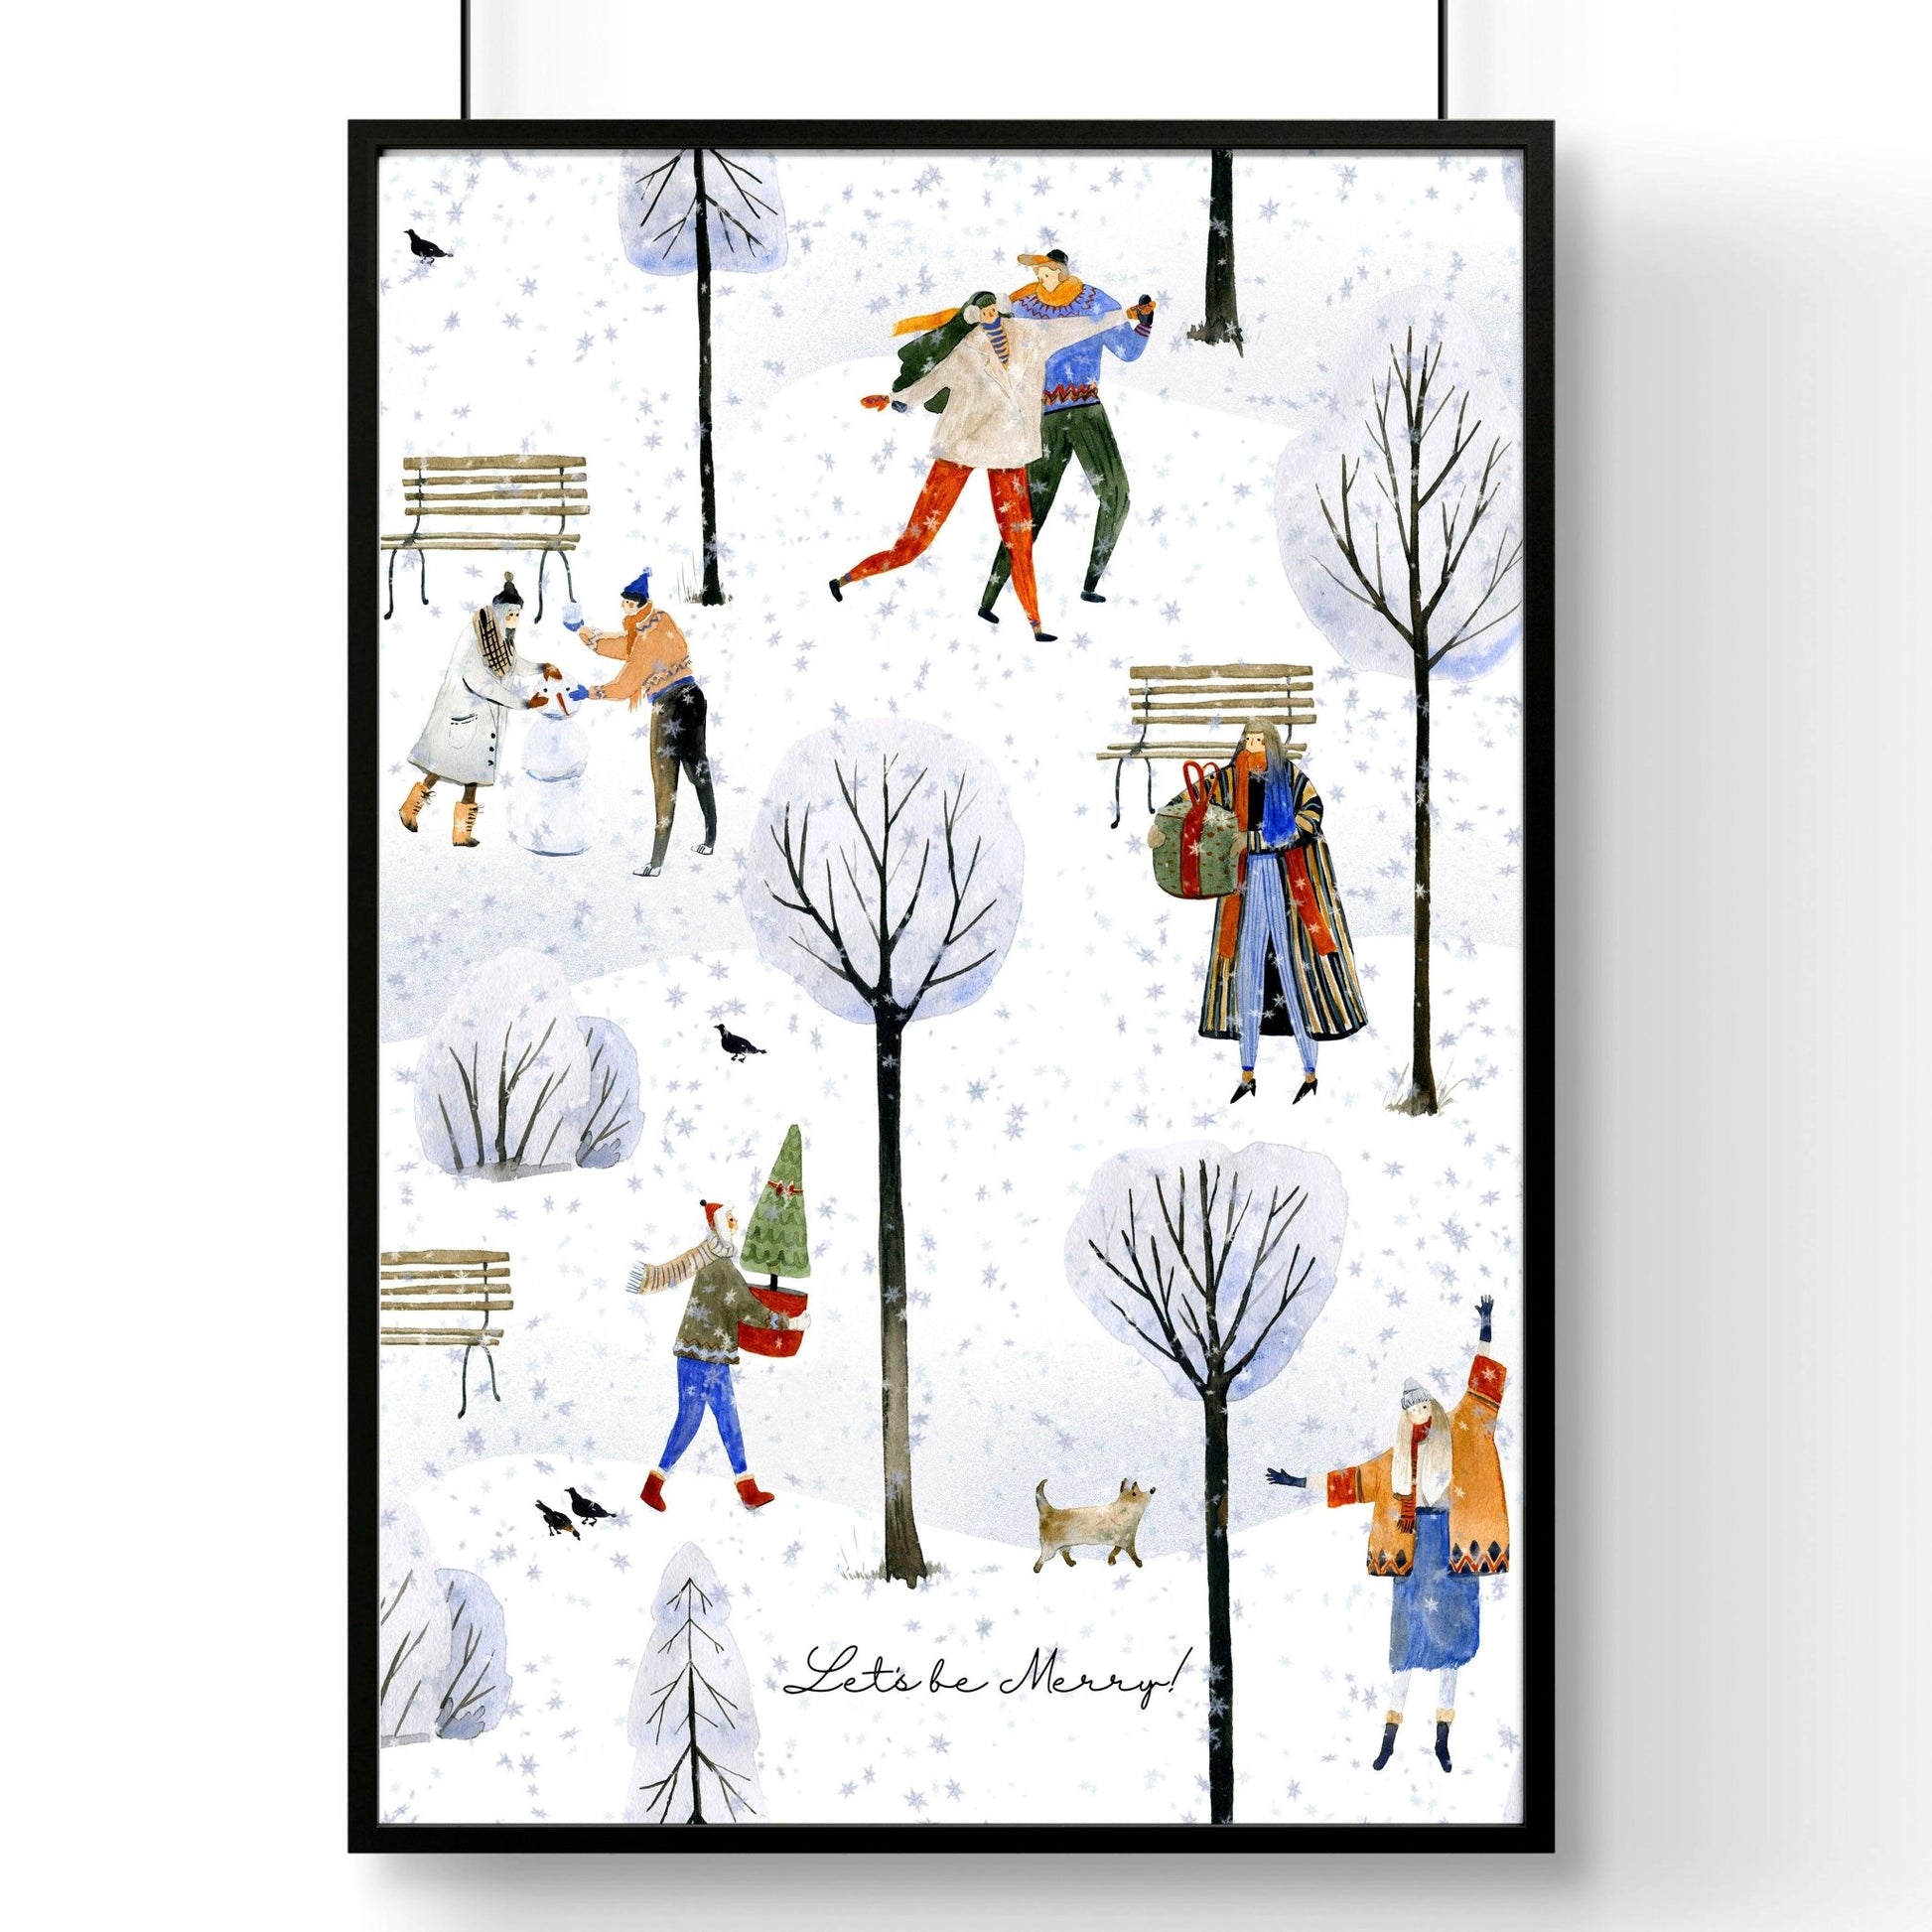 Christmas decorations in the uk | wall art print - About Wall Art